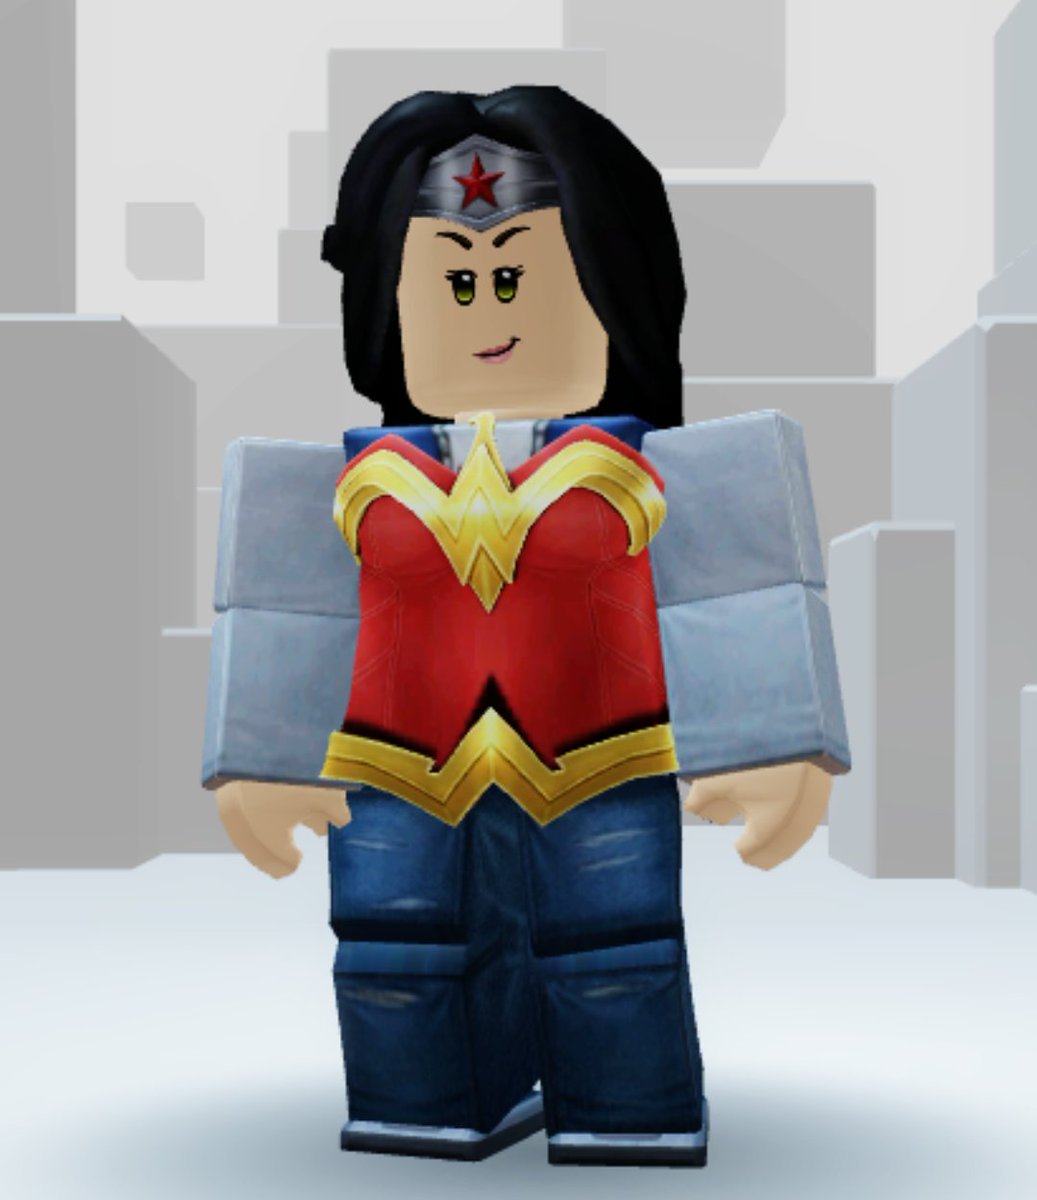 Lord Cowcow On Twitter Has The Mystery Of What Package Bundle The Wonder Woman Armour Accessories Work With Been Solved Yet - neoclassic female v2 roblox